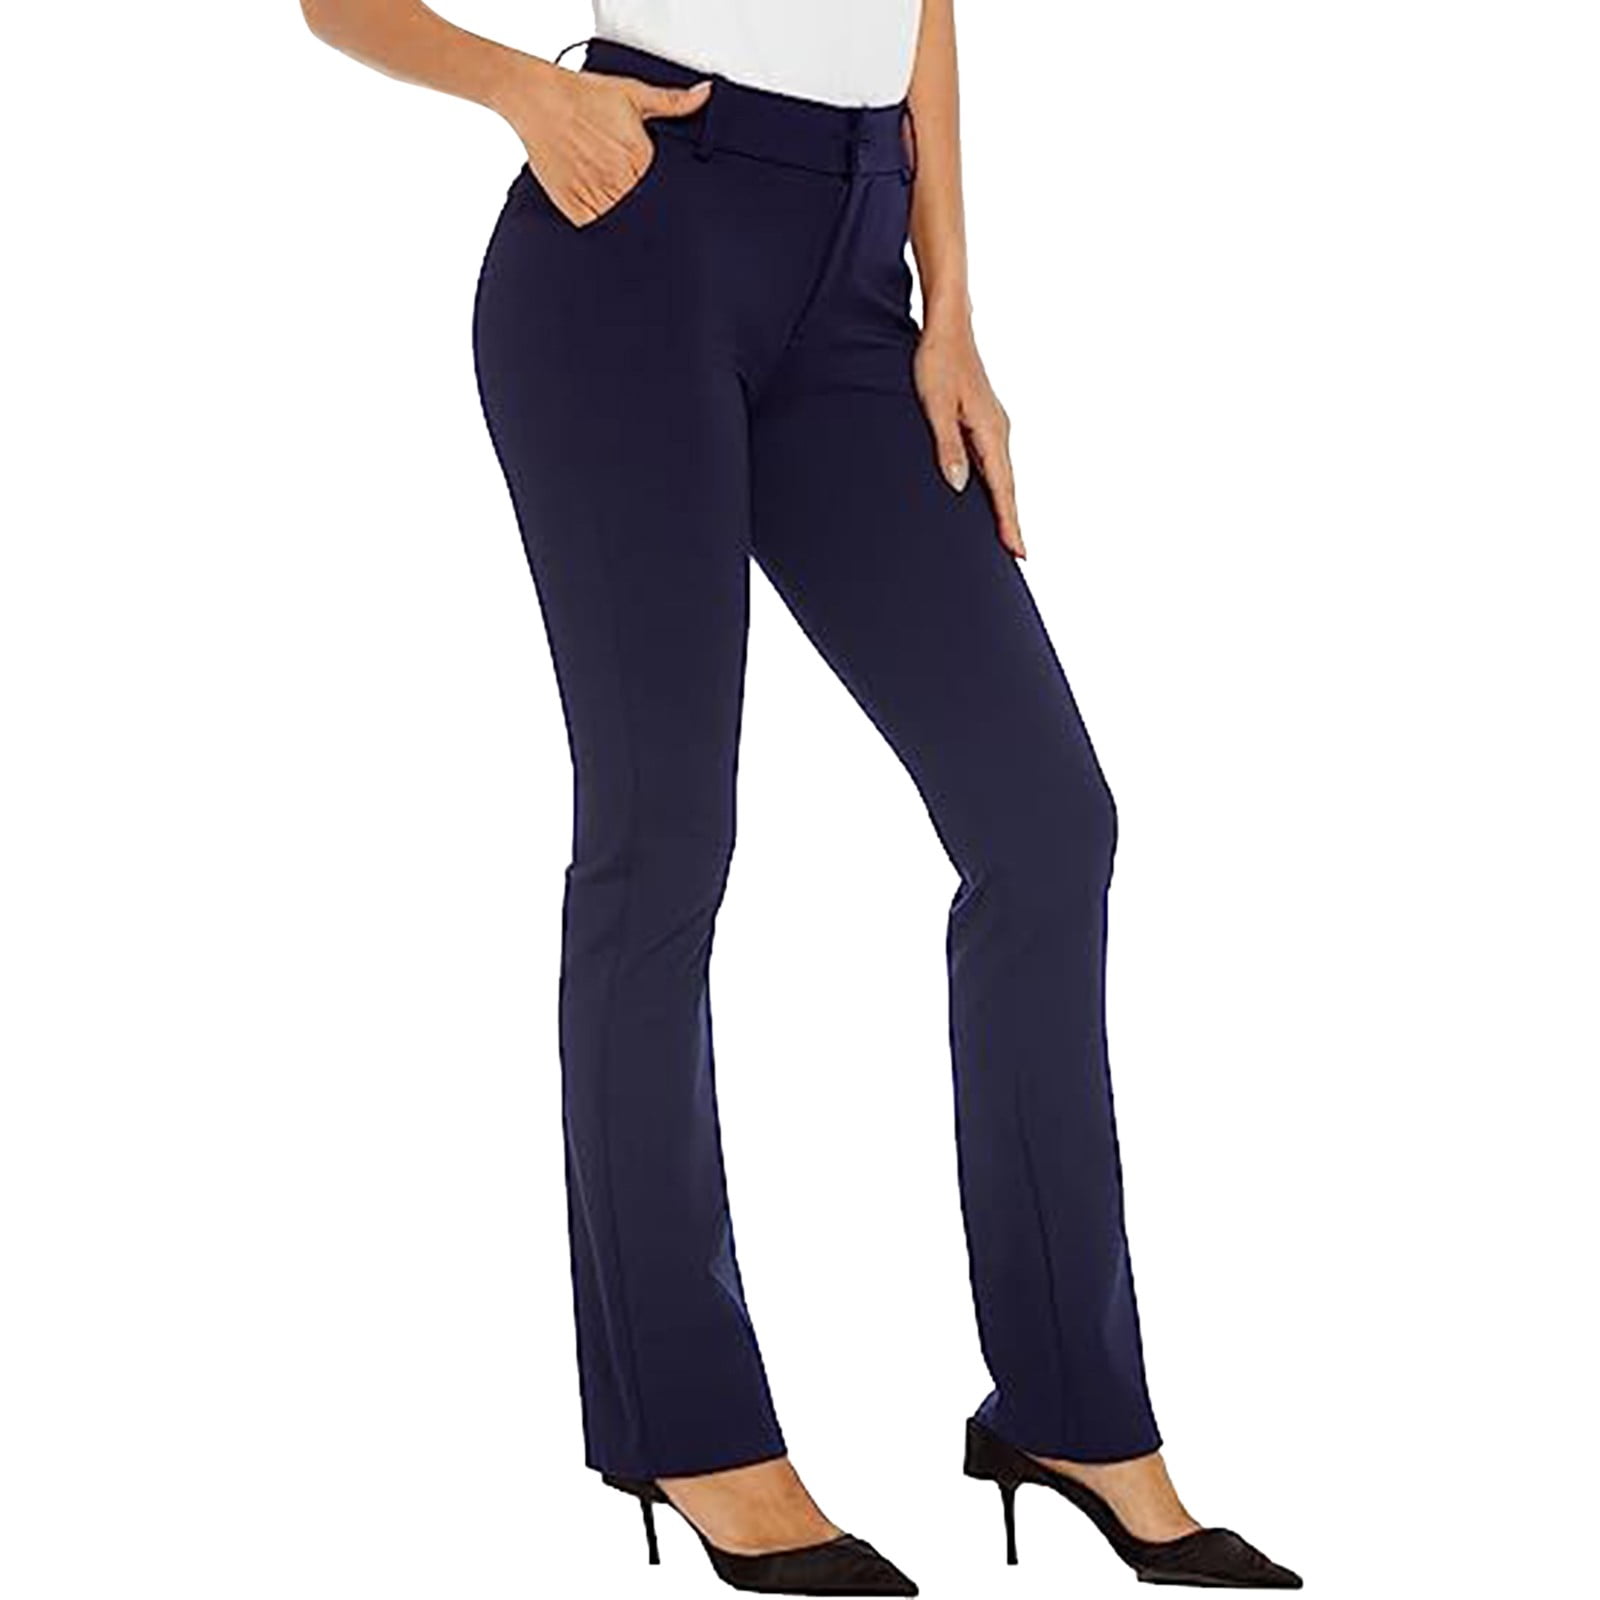 adviicd Plus Size Pants for Women Work Casual Women High Waisted Pants ...